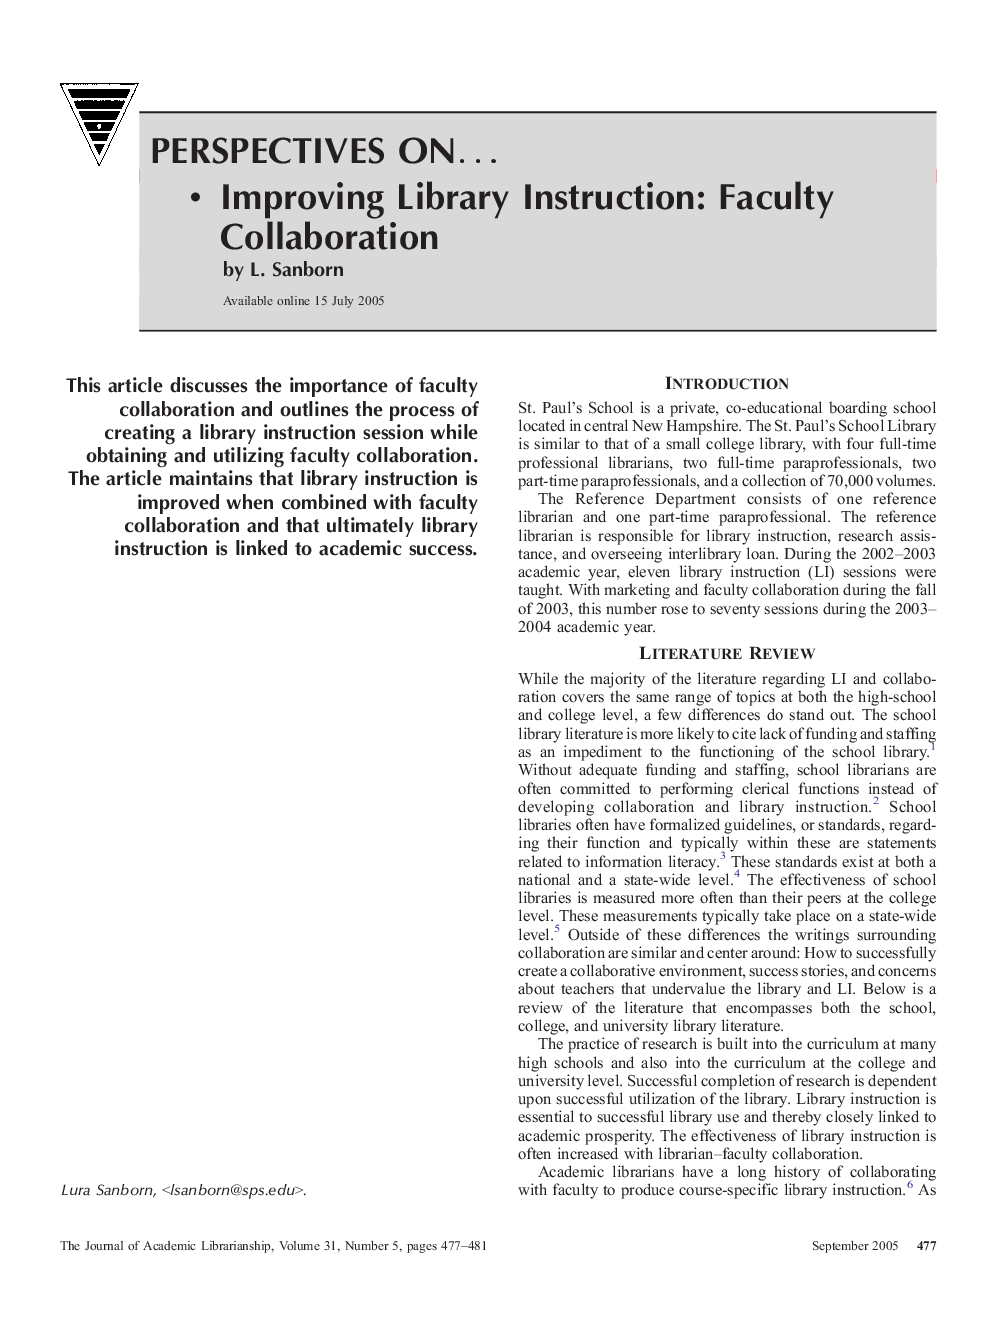 Perspectives onâ¦ Improving Library Instruction: Faculty Collaboration